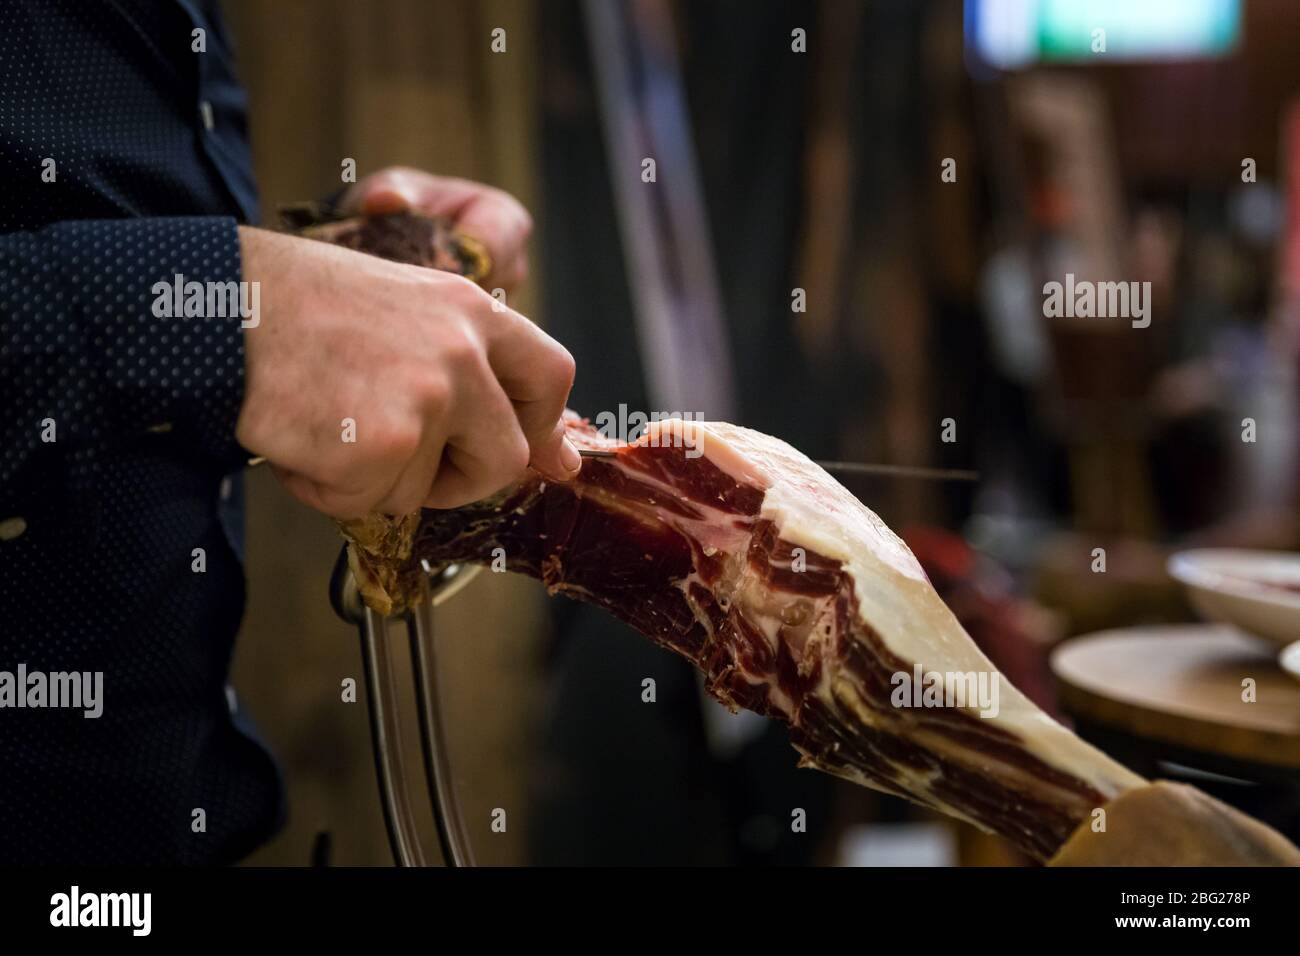 Closeup of a mans hand with a carving knife slicing of pieces of a serrano ham leg. Stock Photo